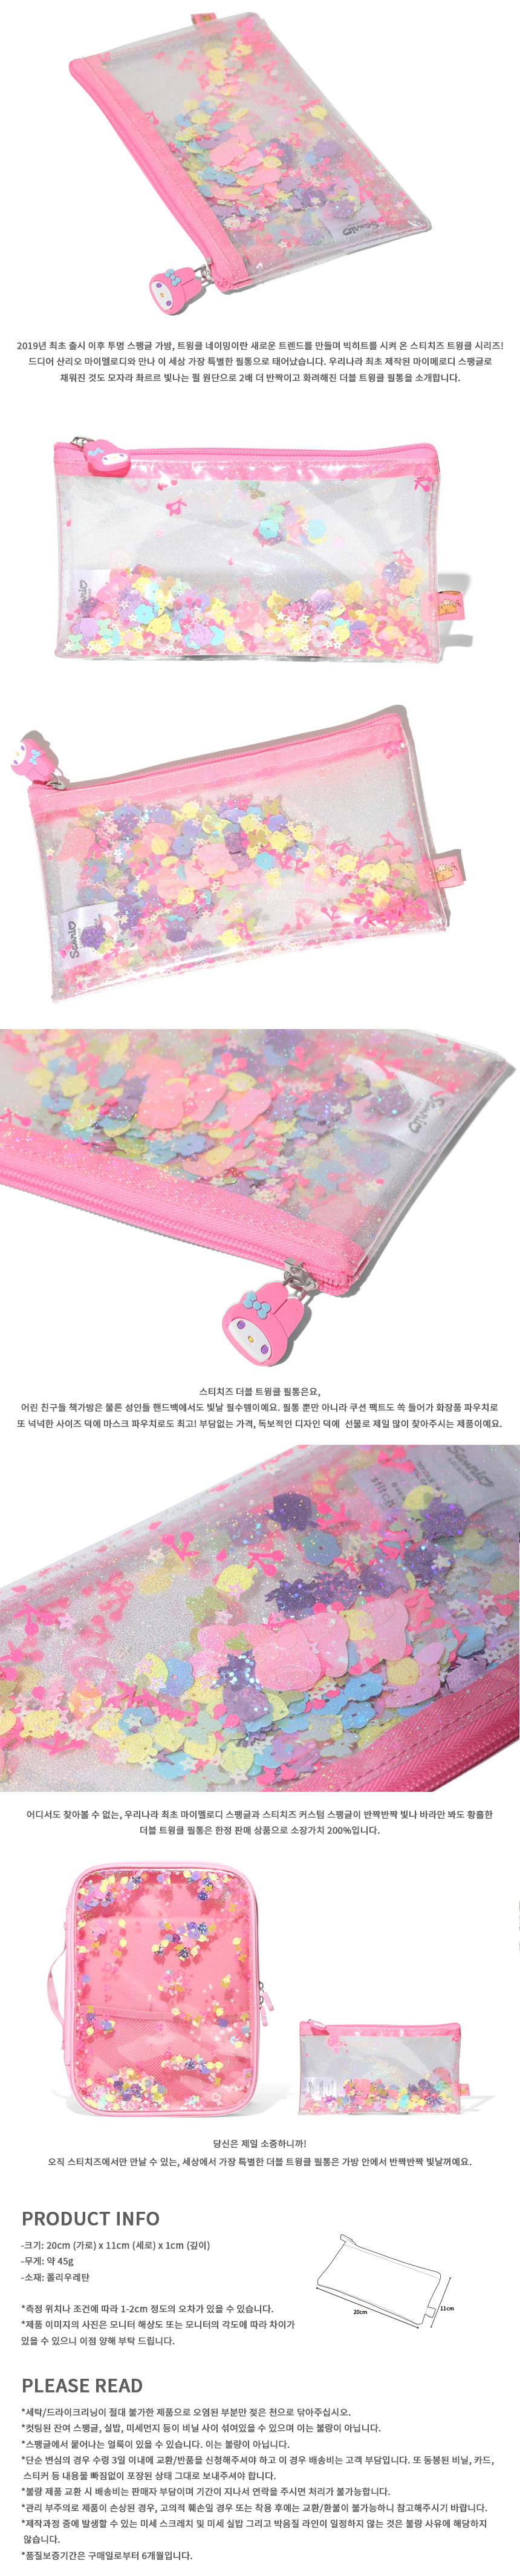 stitcheese-web-my-melody-double-twinkle-pencil-case.jpg